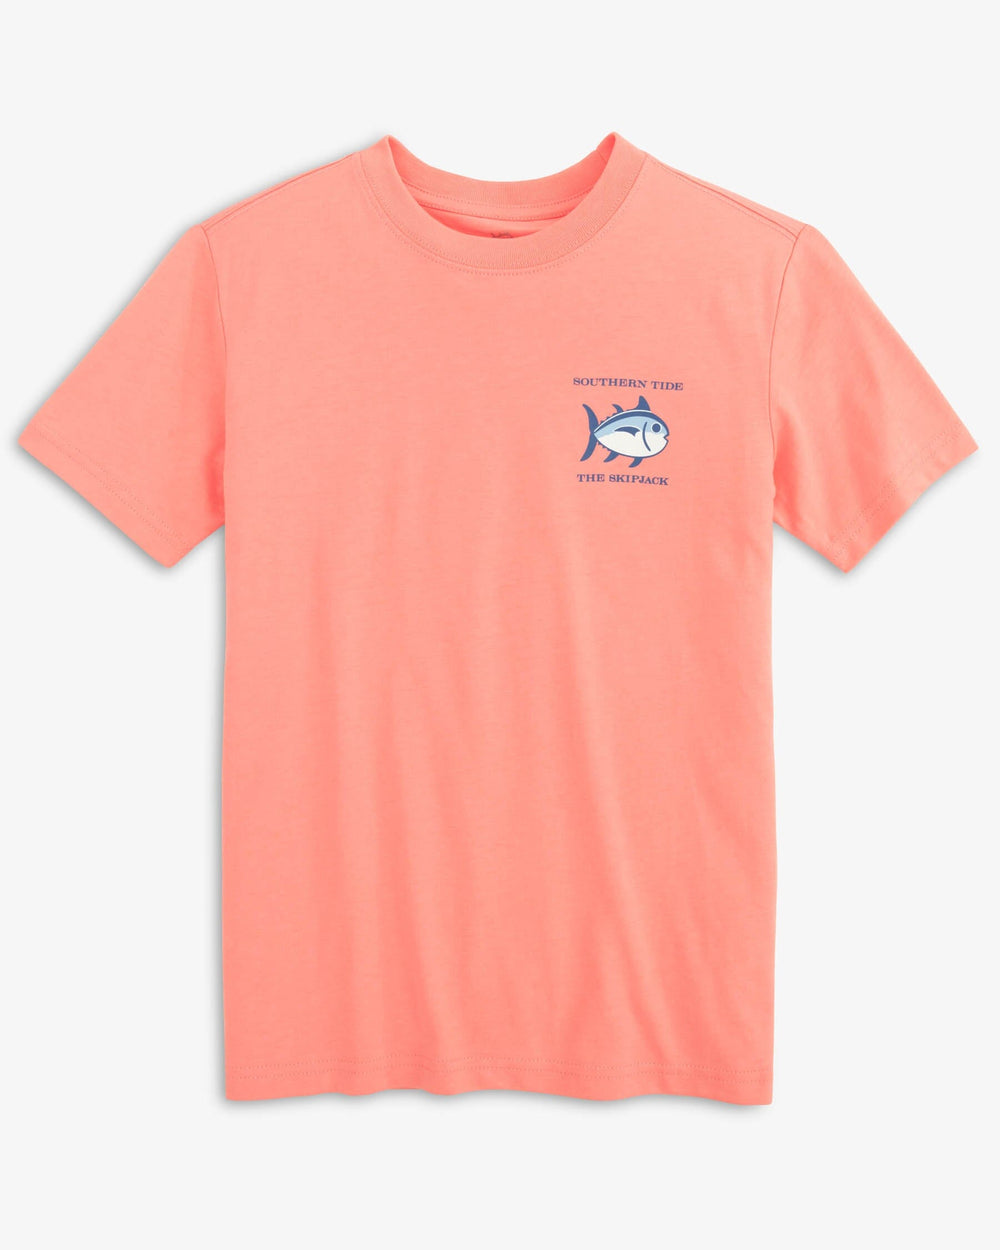 The front view of the Southern Tide Youth Original Skipjack T-Shirt by Southern Tide - Flamingo Pink